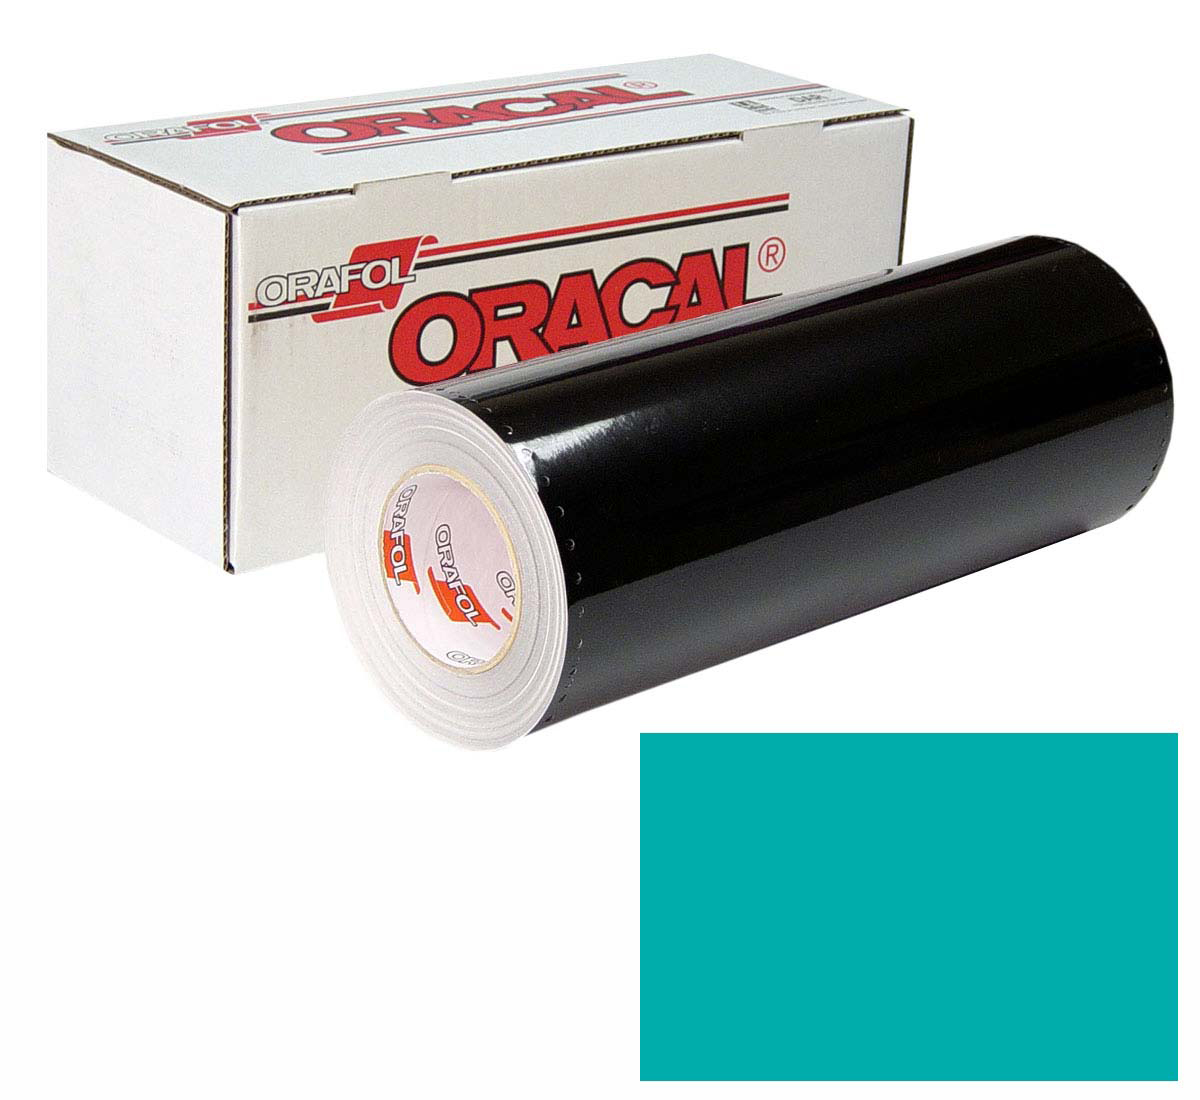 ORACAL 641 30in X 50yd 054 Turquoise